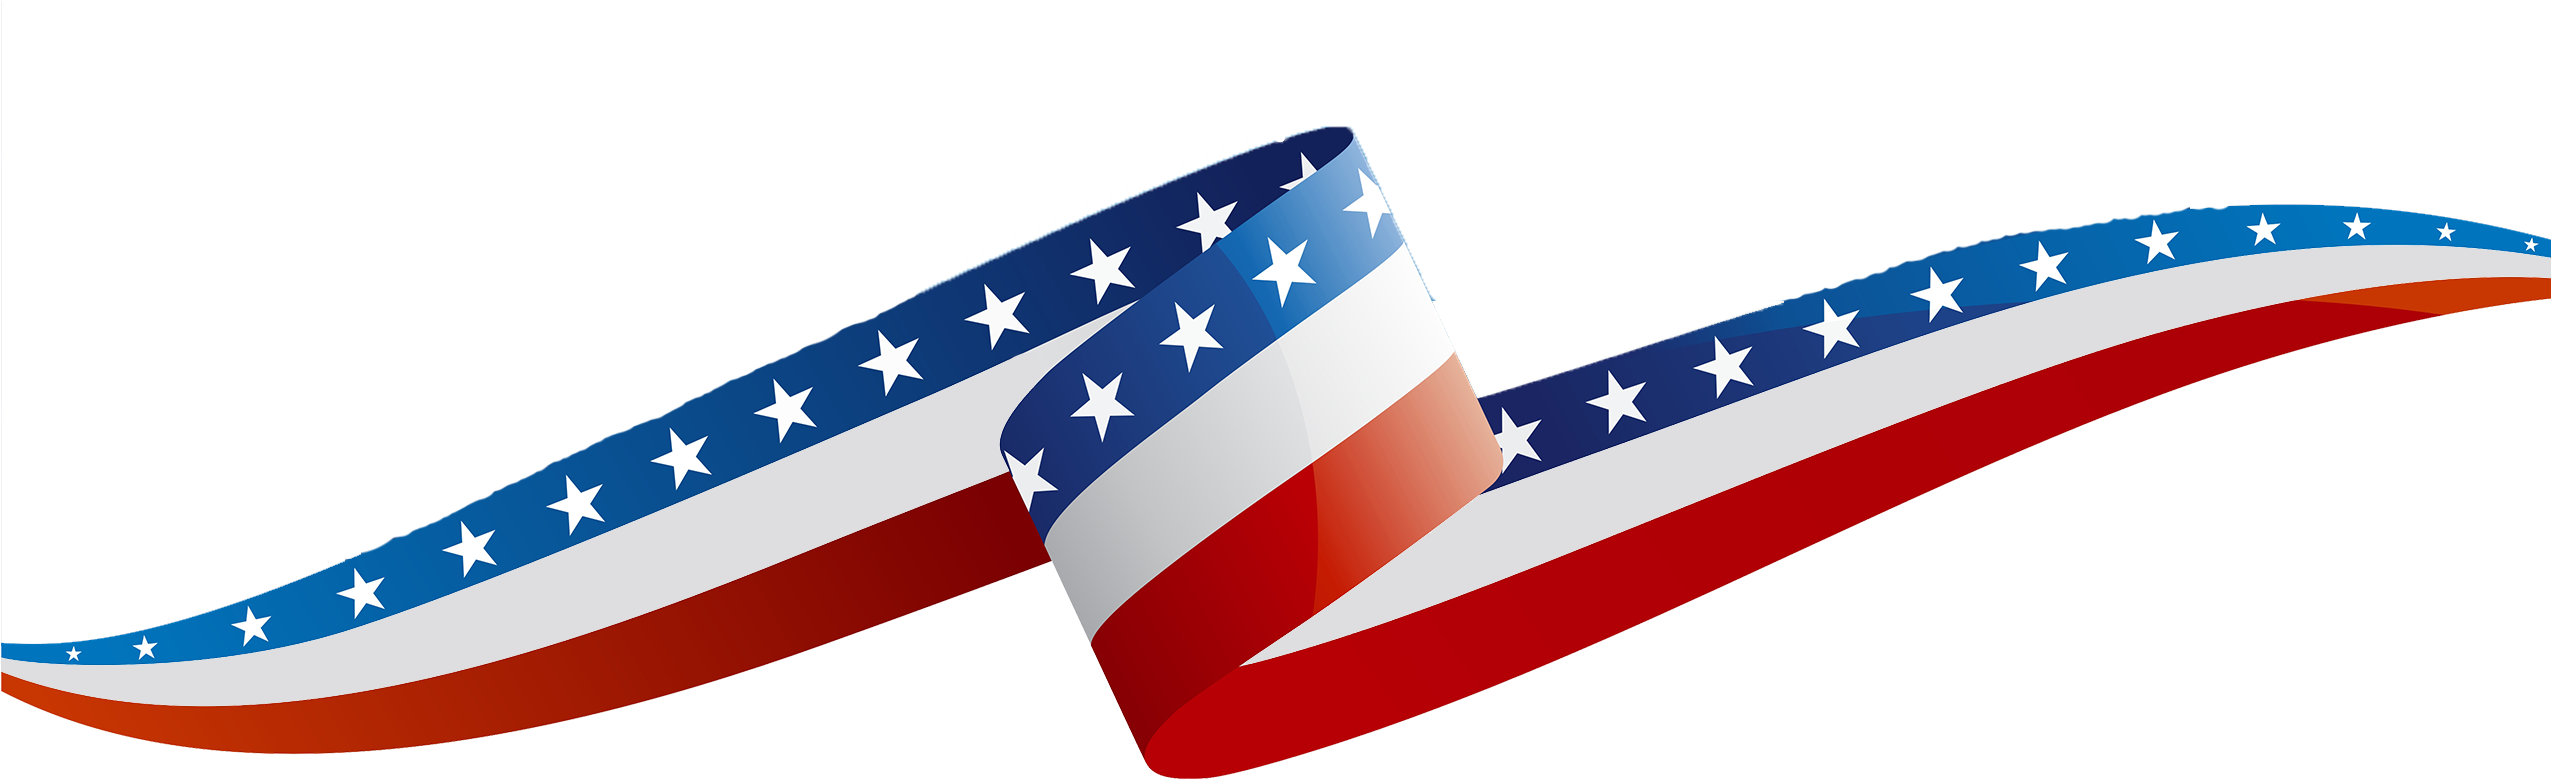 Red White And Blue Ribbon - Red White And Blue Ribbon Png (2550x876)